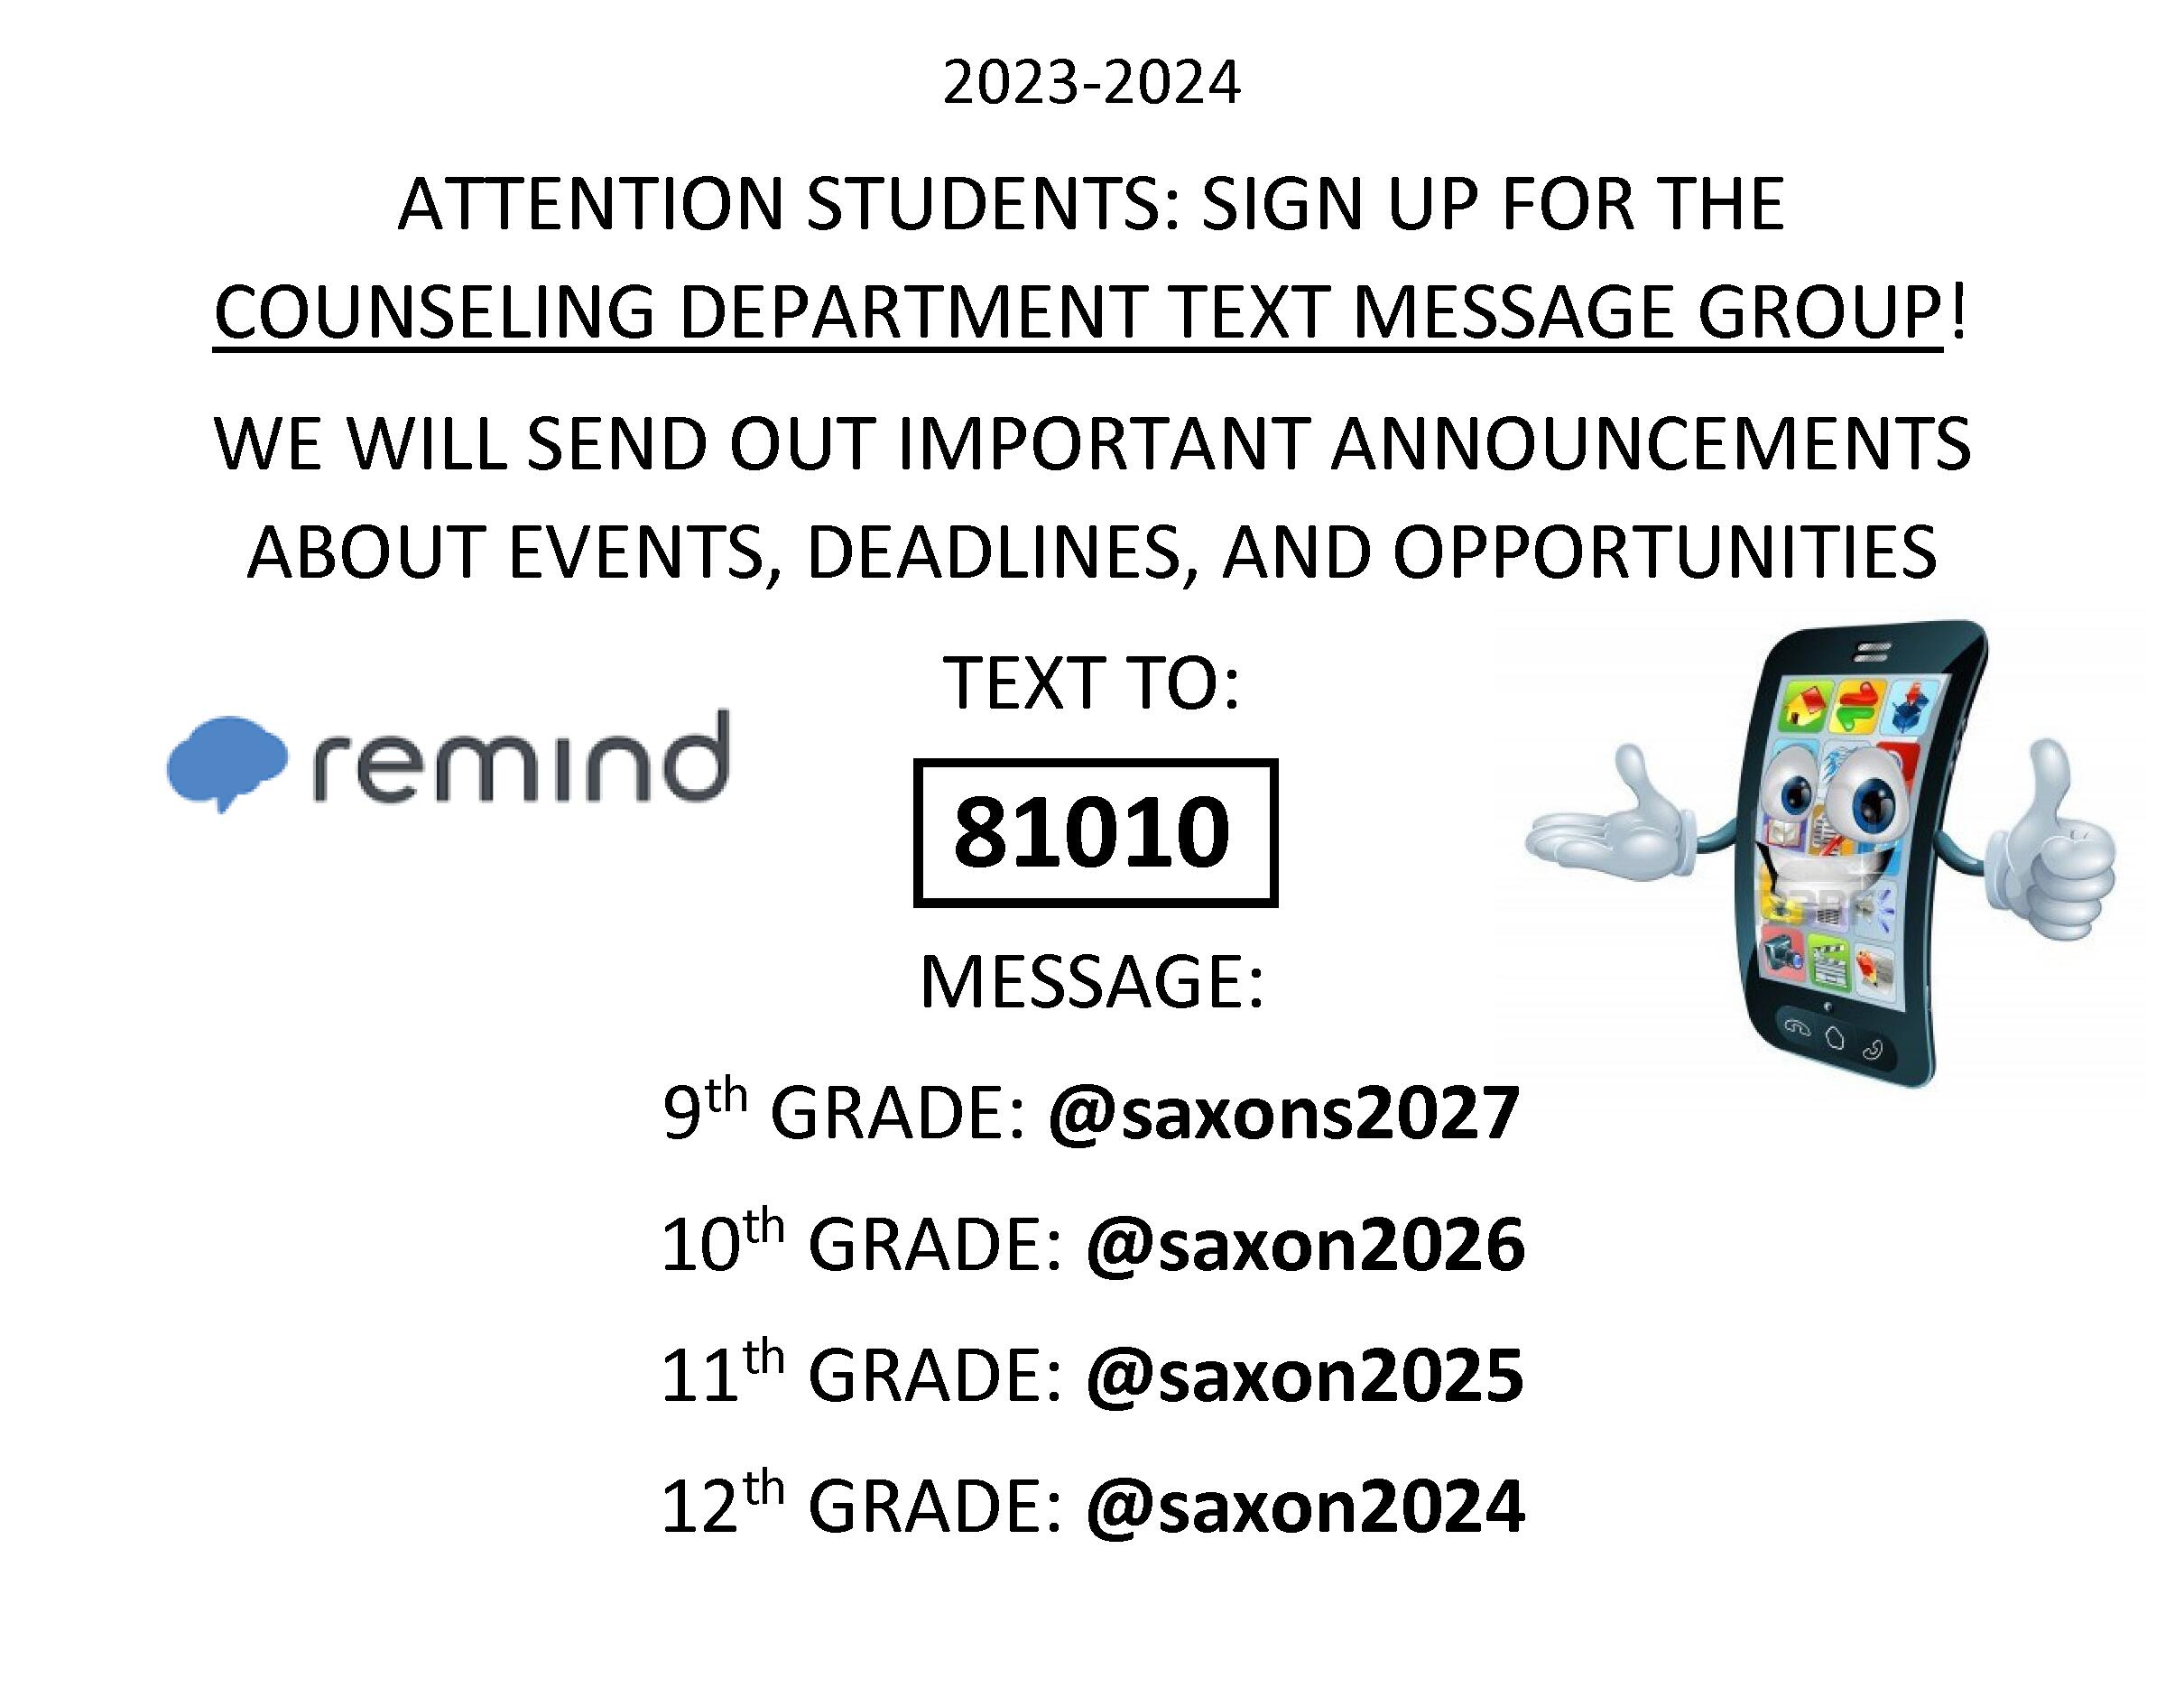 Sign up for the Counseling Department's notification system